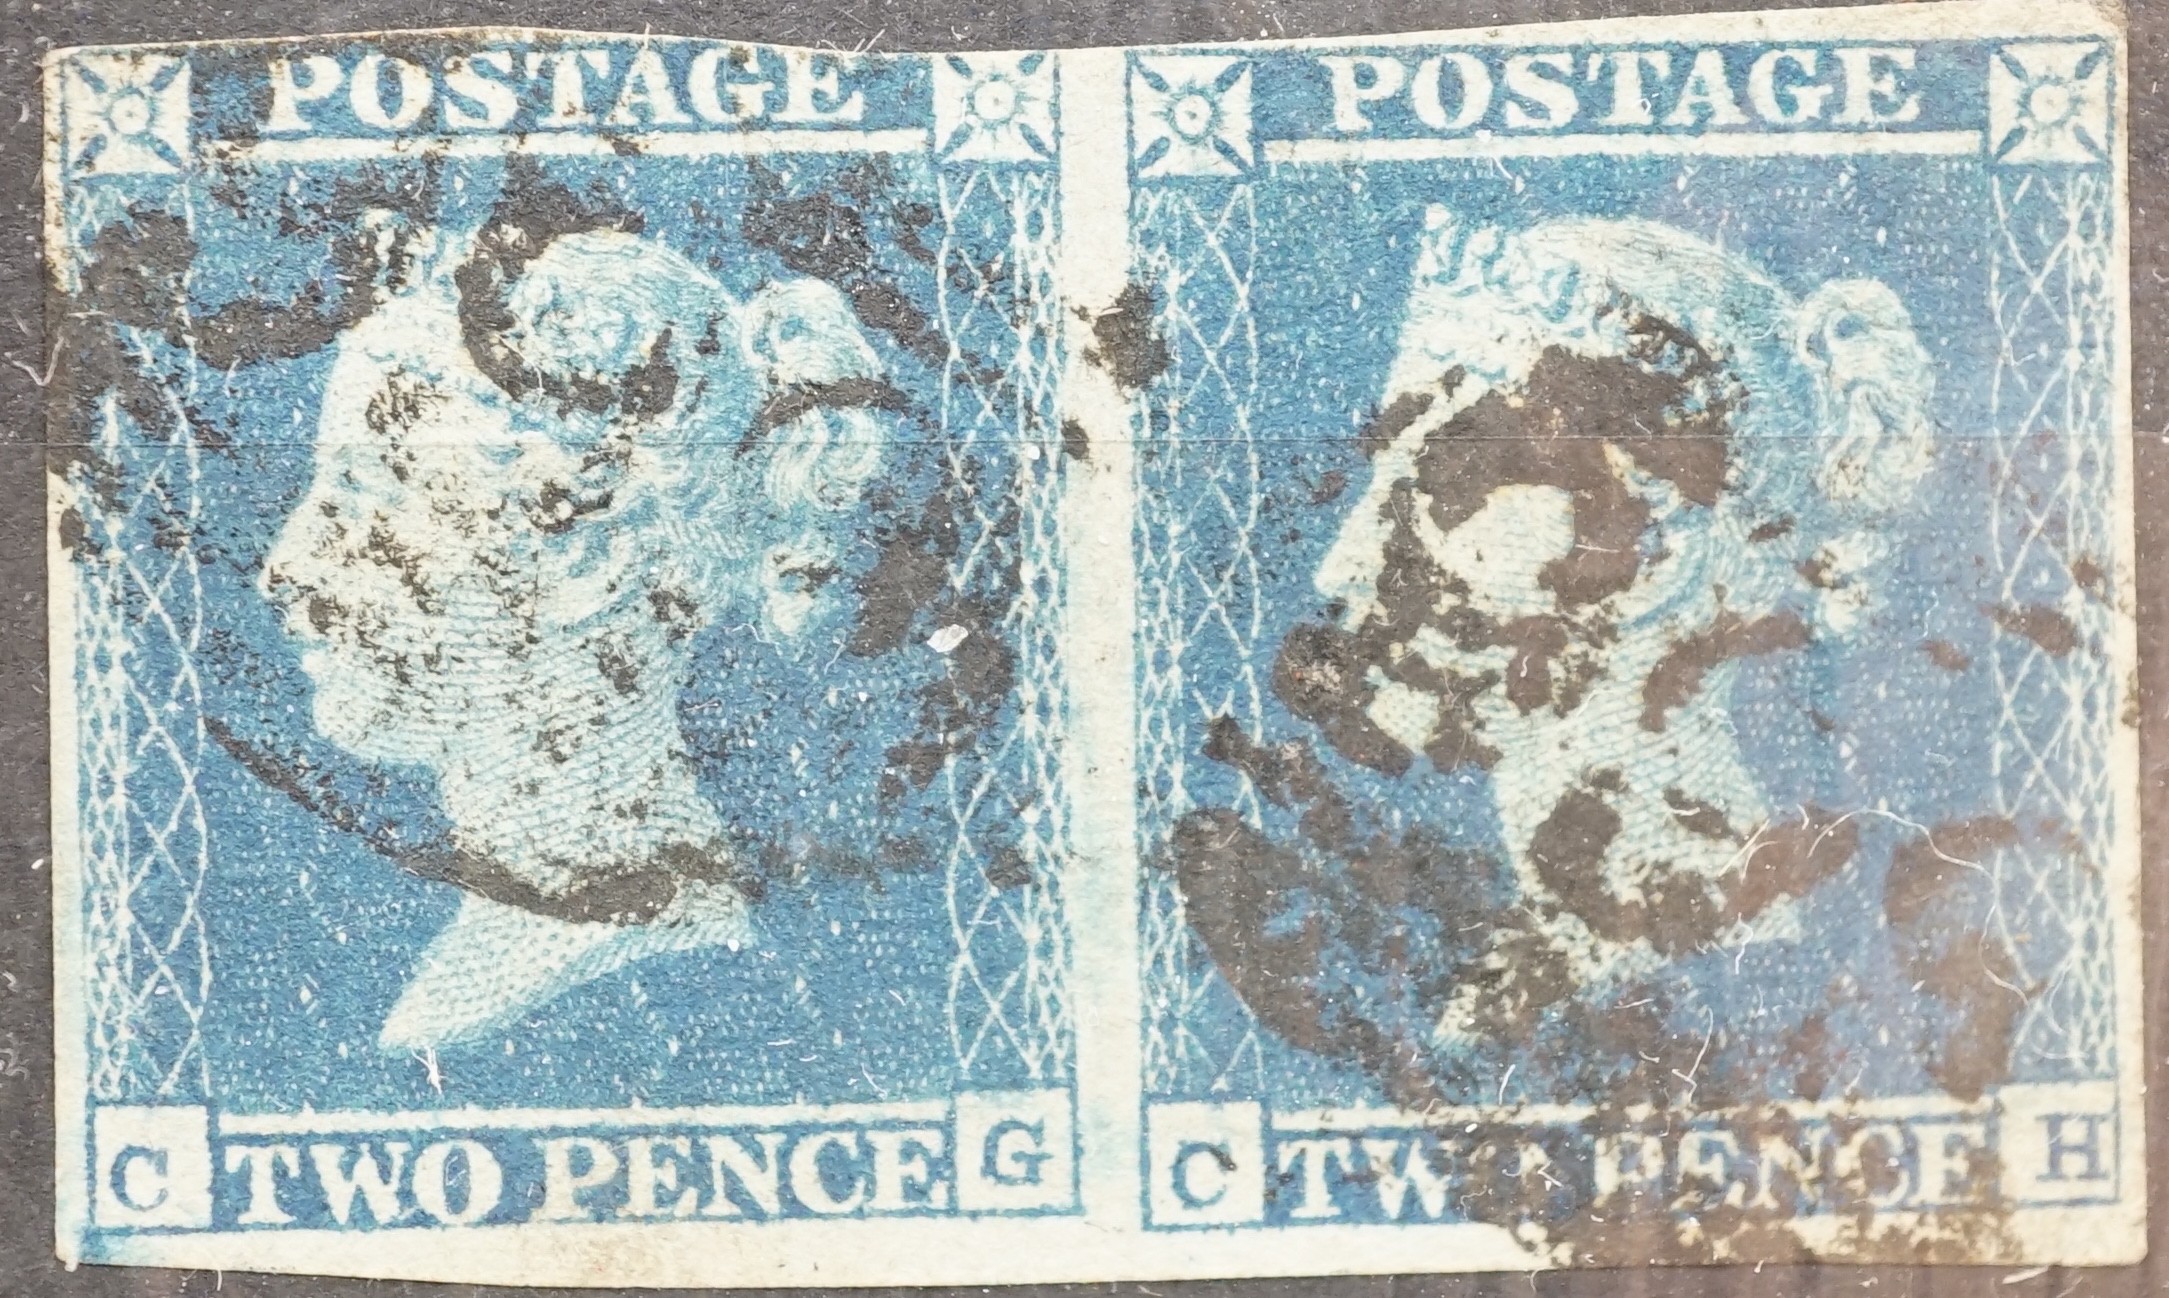 Great Britain Queen Victoria stamps with 1840 1d black (x2 cut into),1841 2d blue pair on cover,1877 £1 telegraph used, 1870 1/2d used and mint, 1882. 2 shilling, 6d, mint